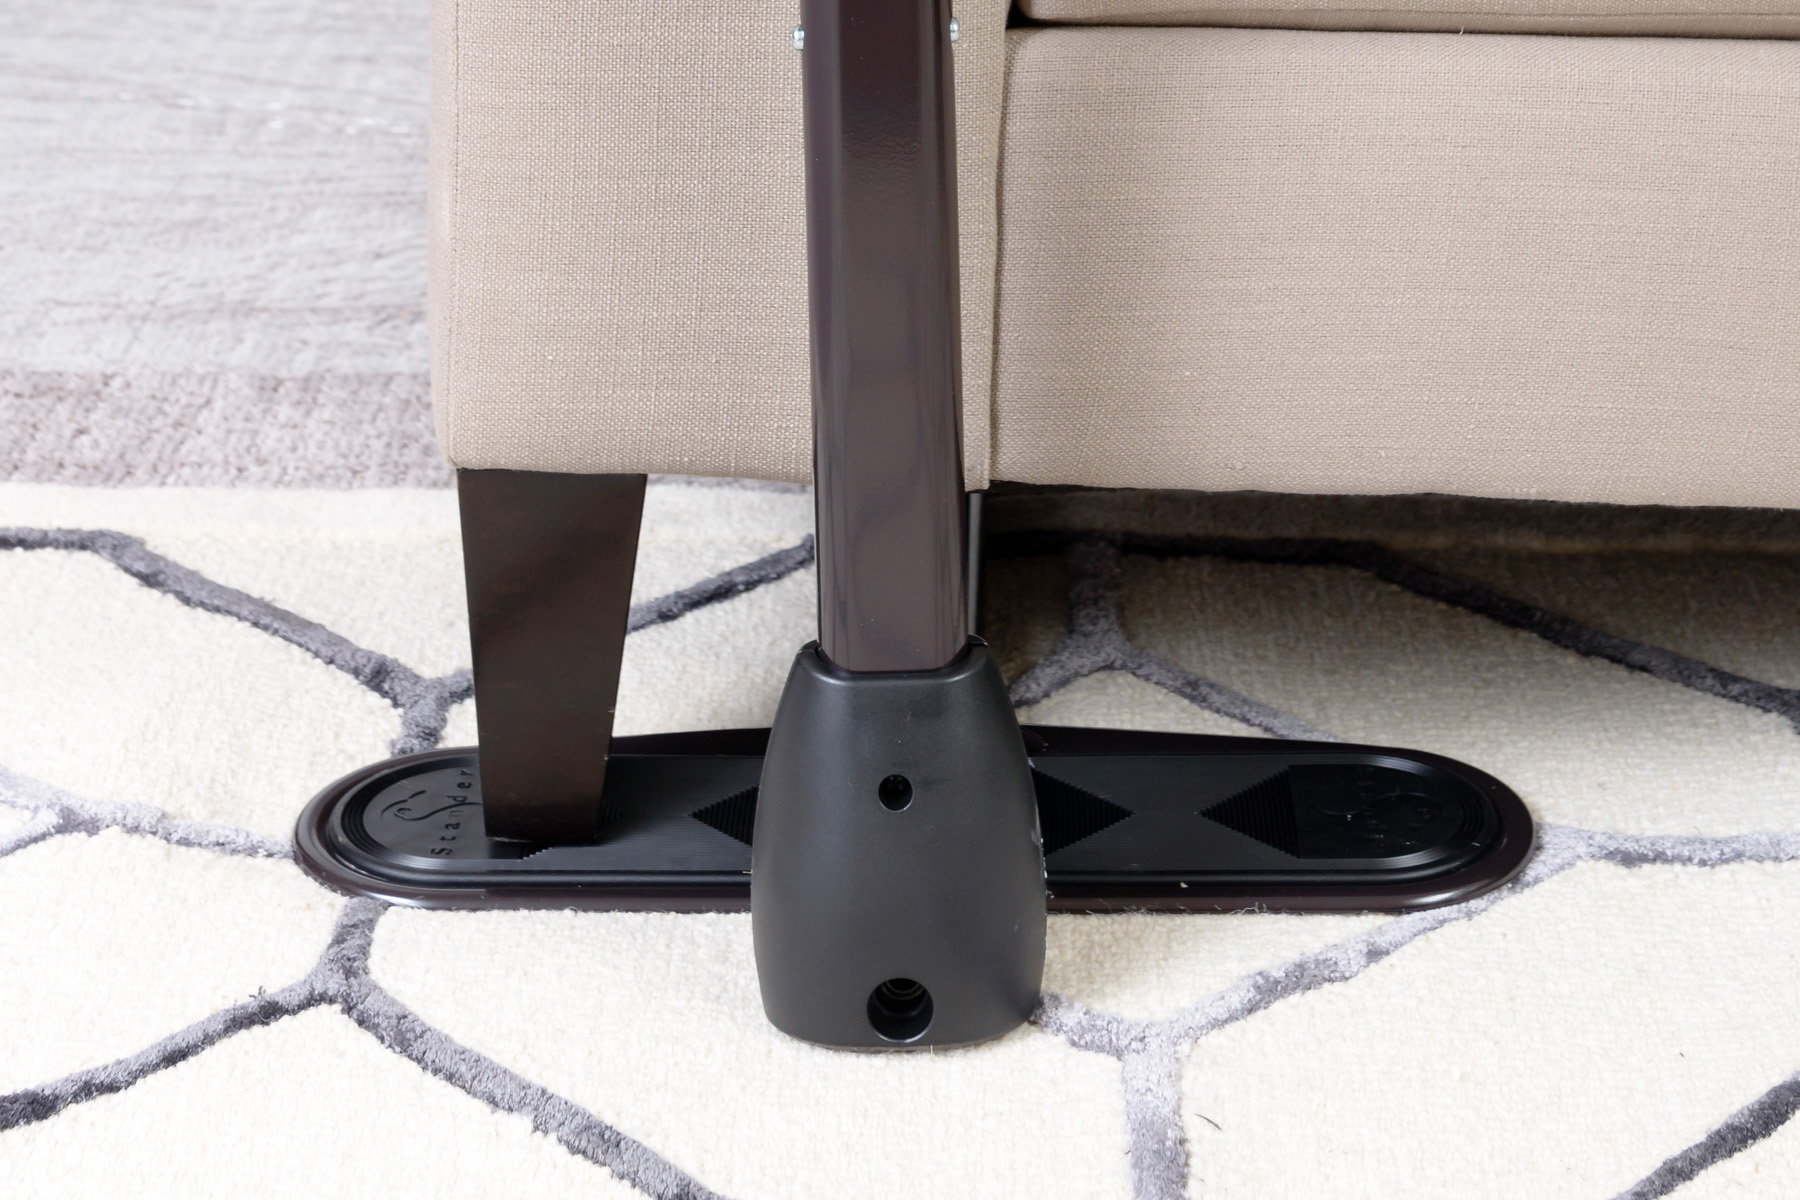 Couch Cane Swivel Tray by Standers : accessory table for the Couch Cane